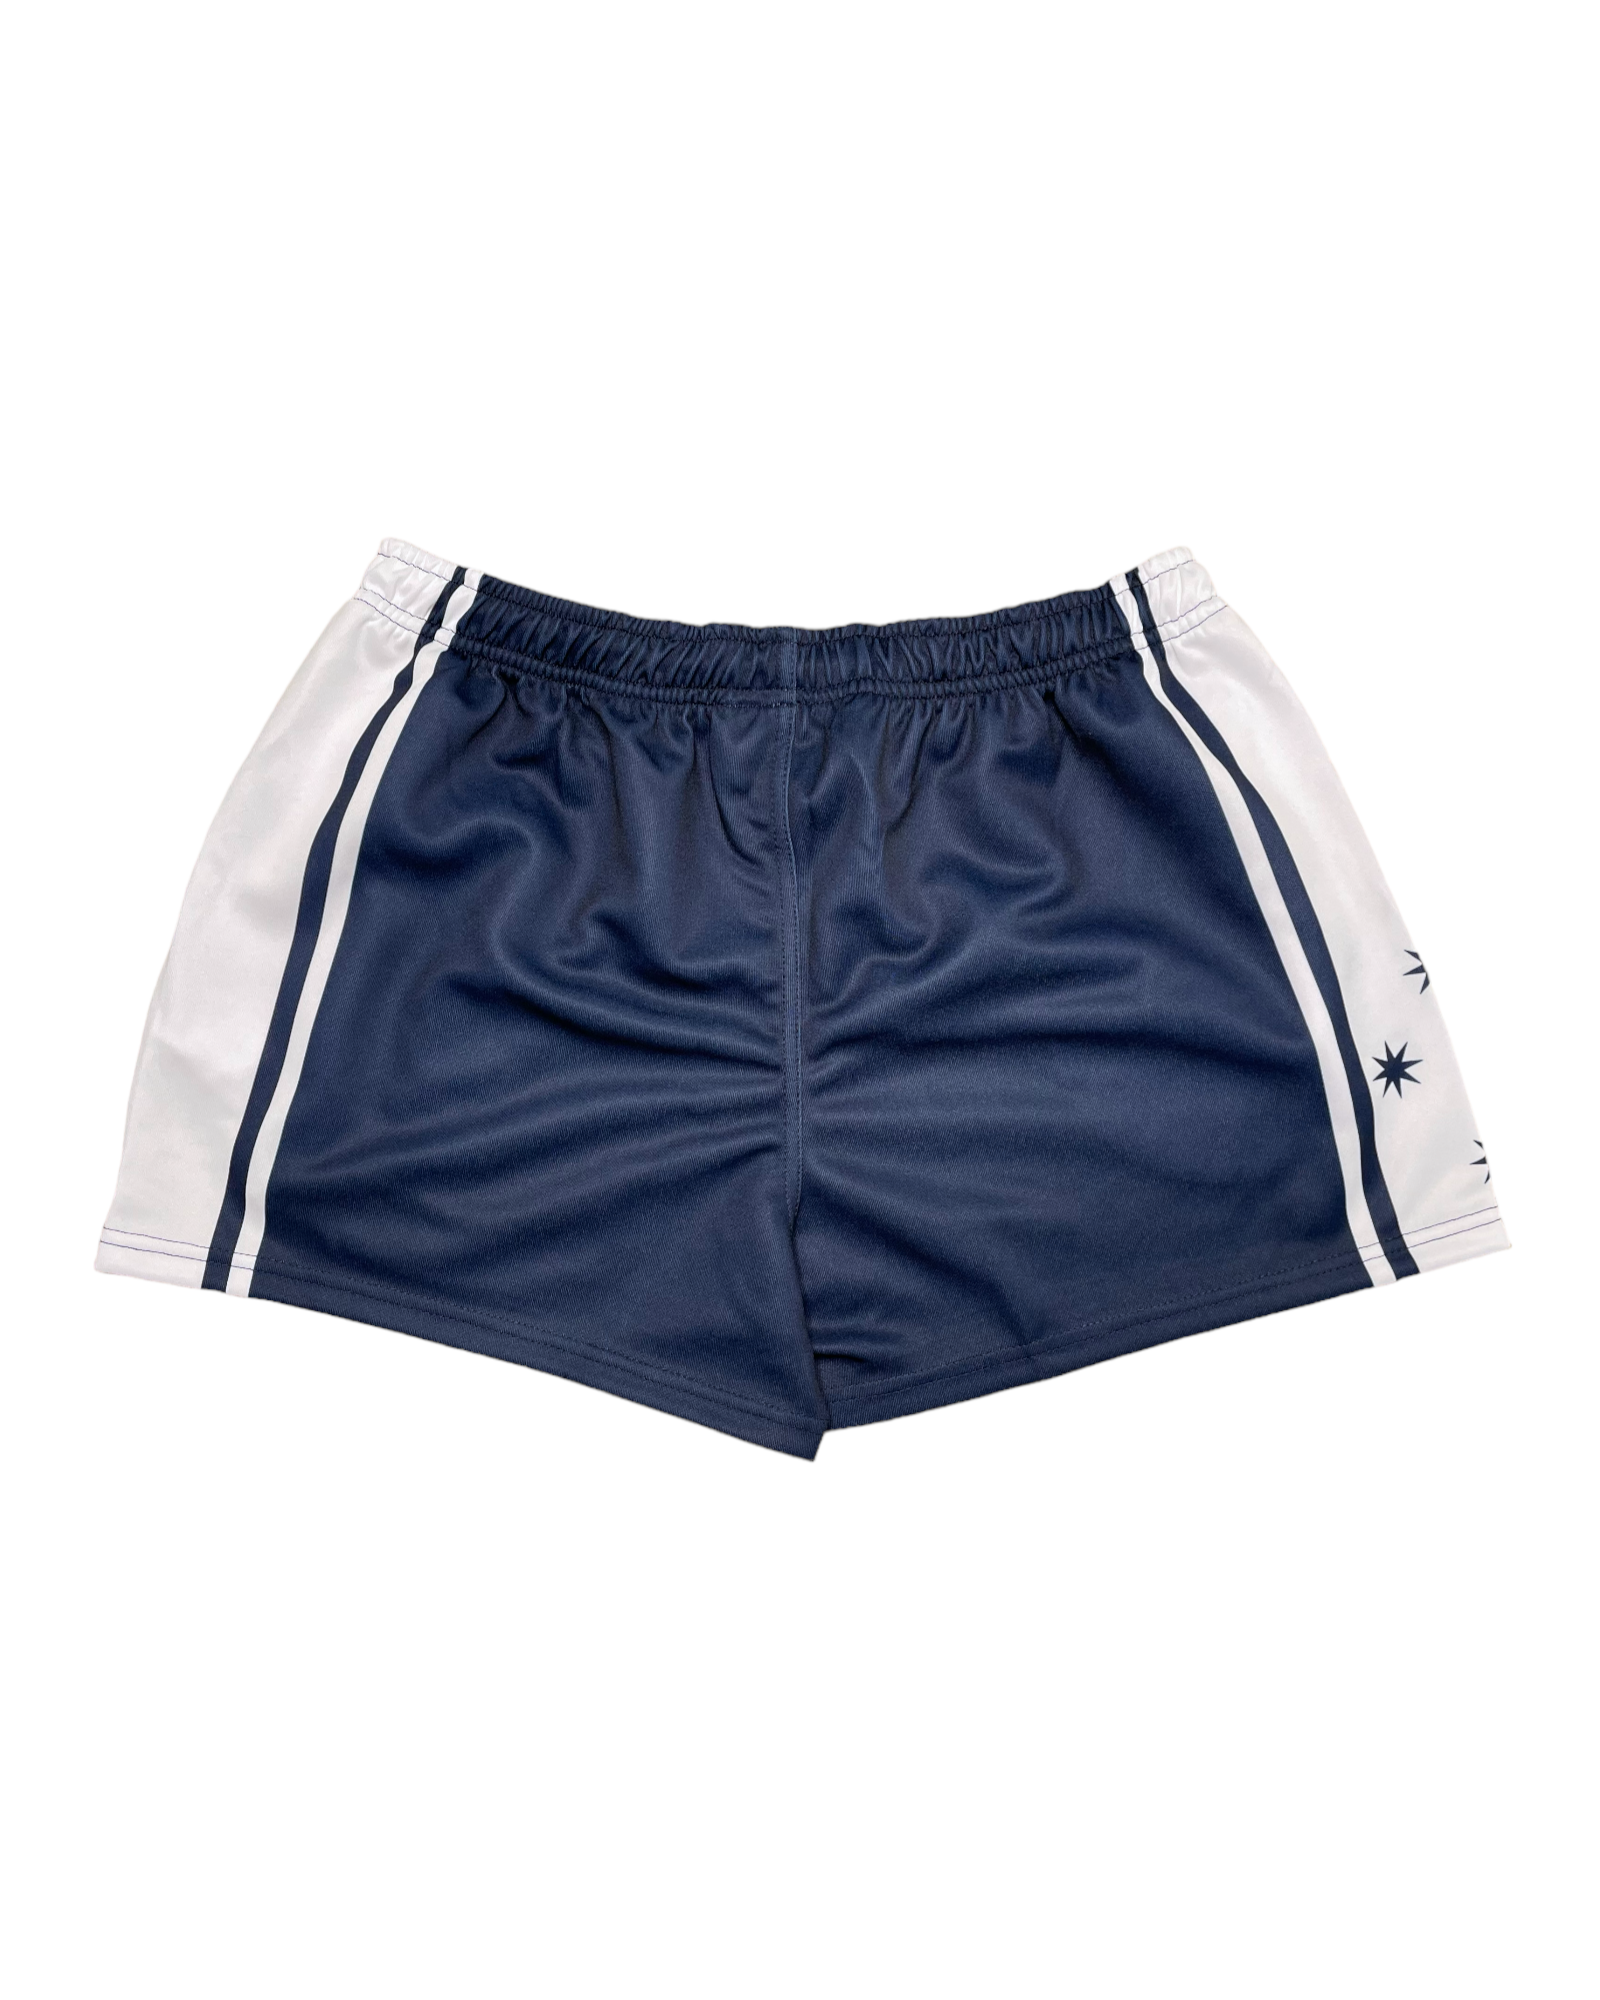 Adults | Footy Shorts | Heritage | Navy